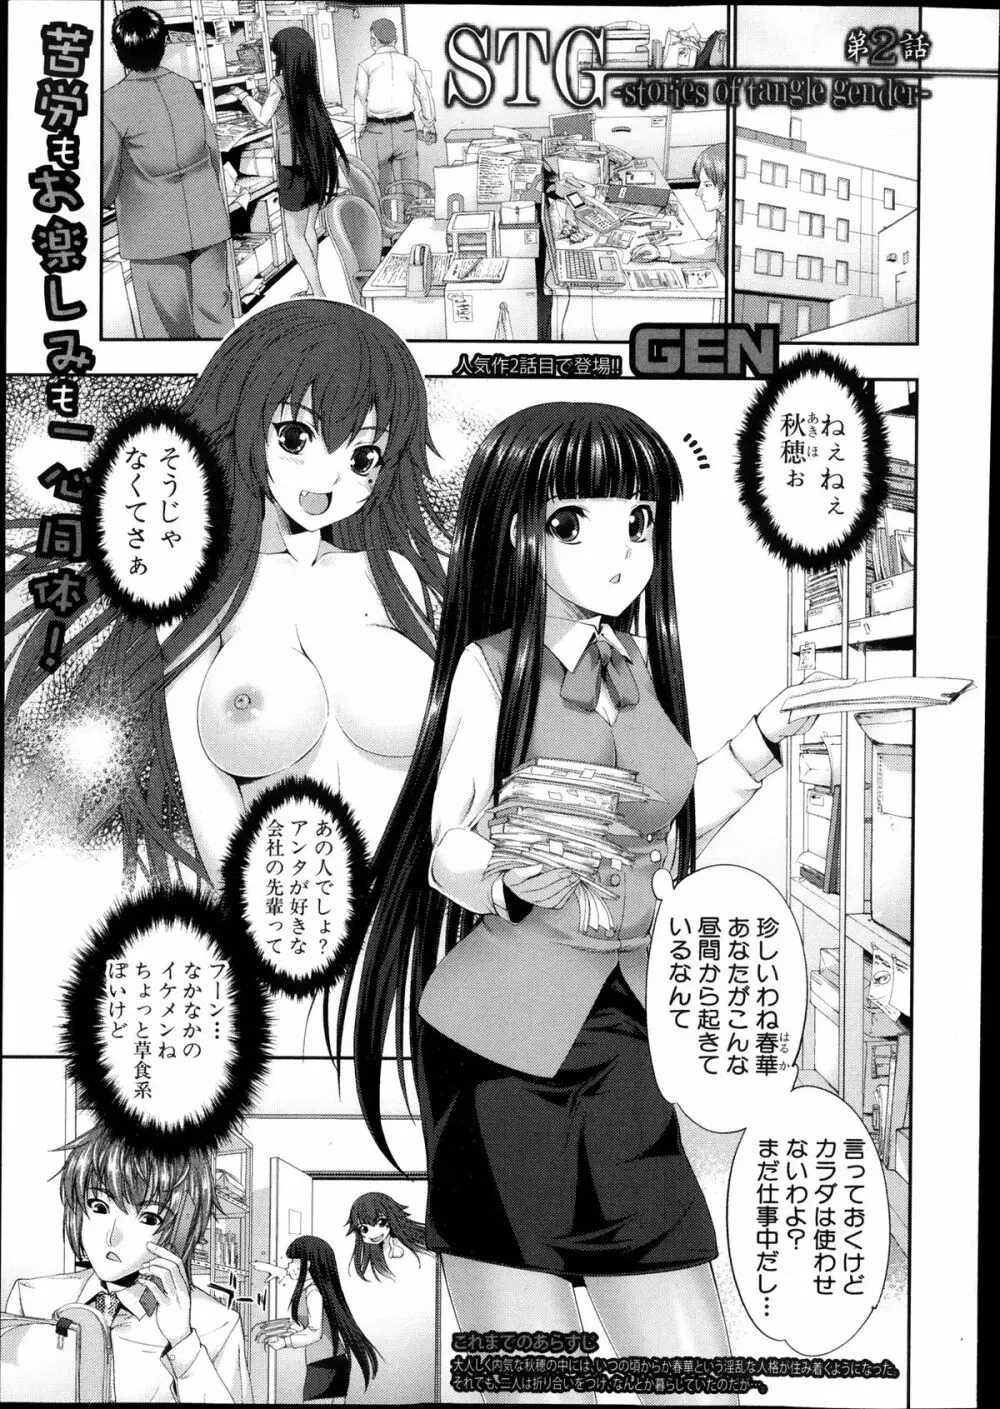 STG 第1-4章 Page.29